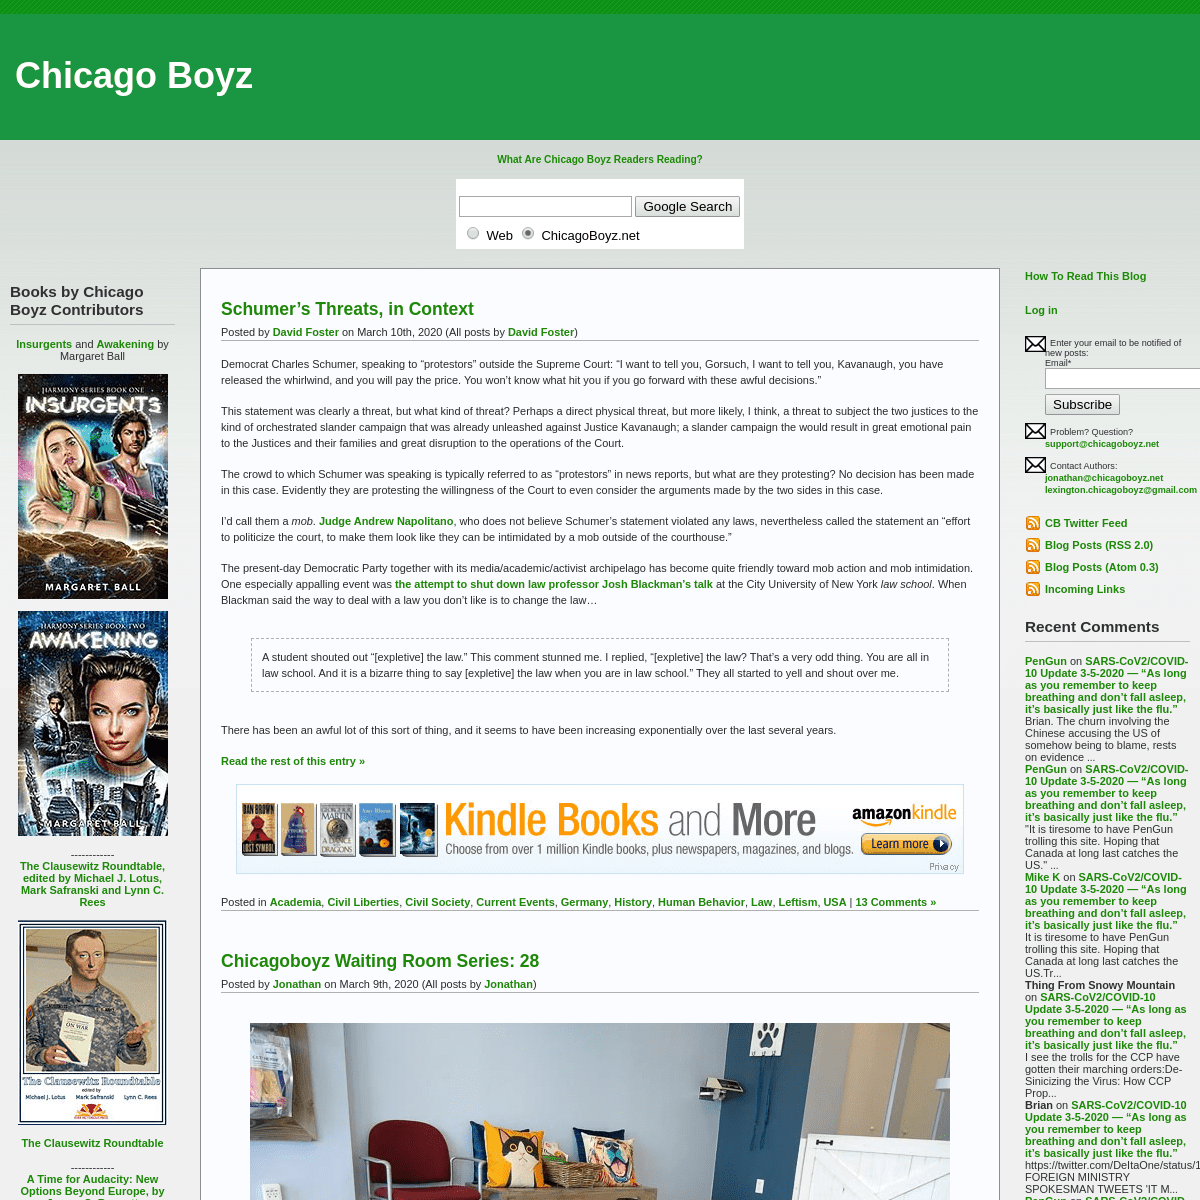 A complete backup of chicagoboyz.net